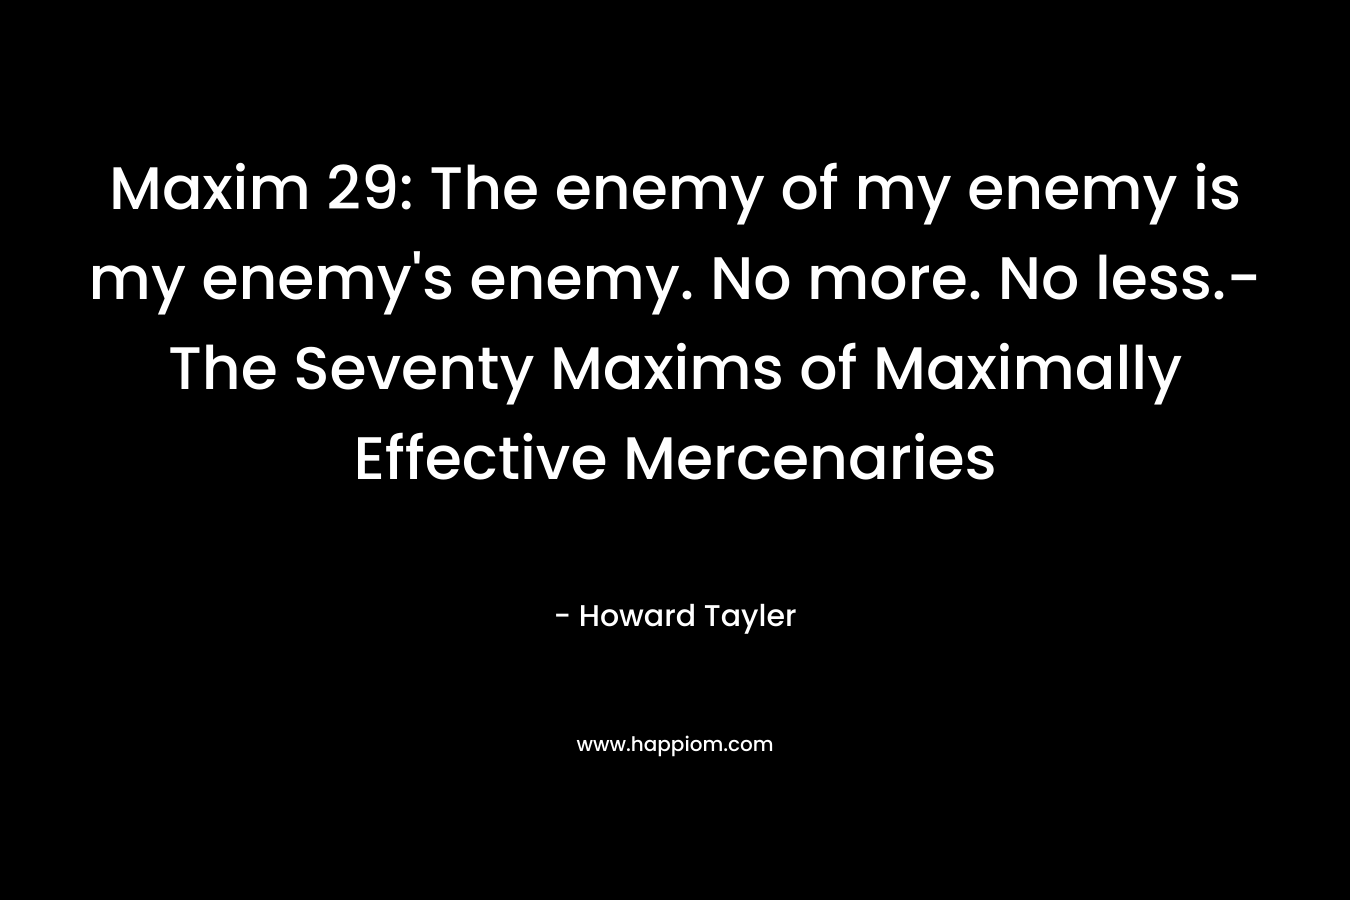 Maxim 29: The enemy of my enemy is my enemy’s enemy. No more. No less.-The Seventy Maxims of Maximally Effective Mercenaries – Howard Tayler